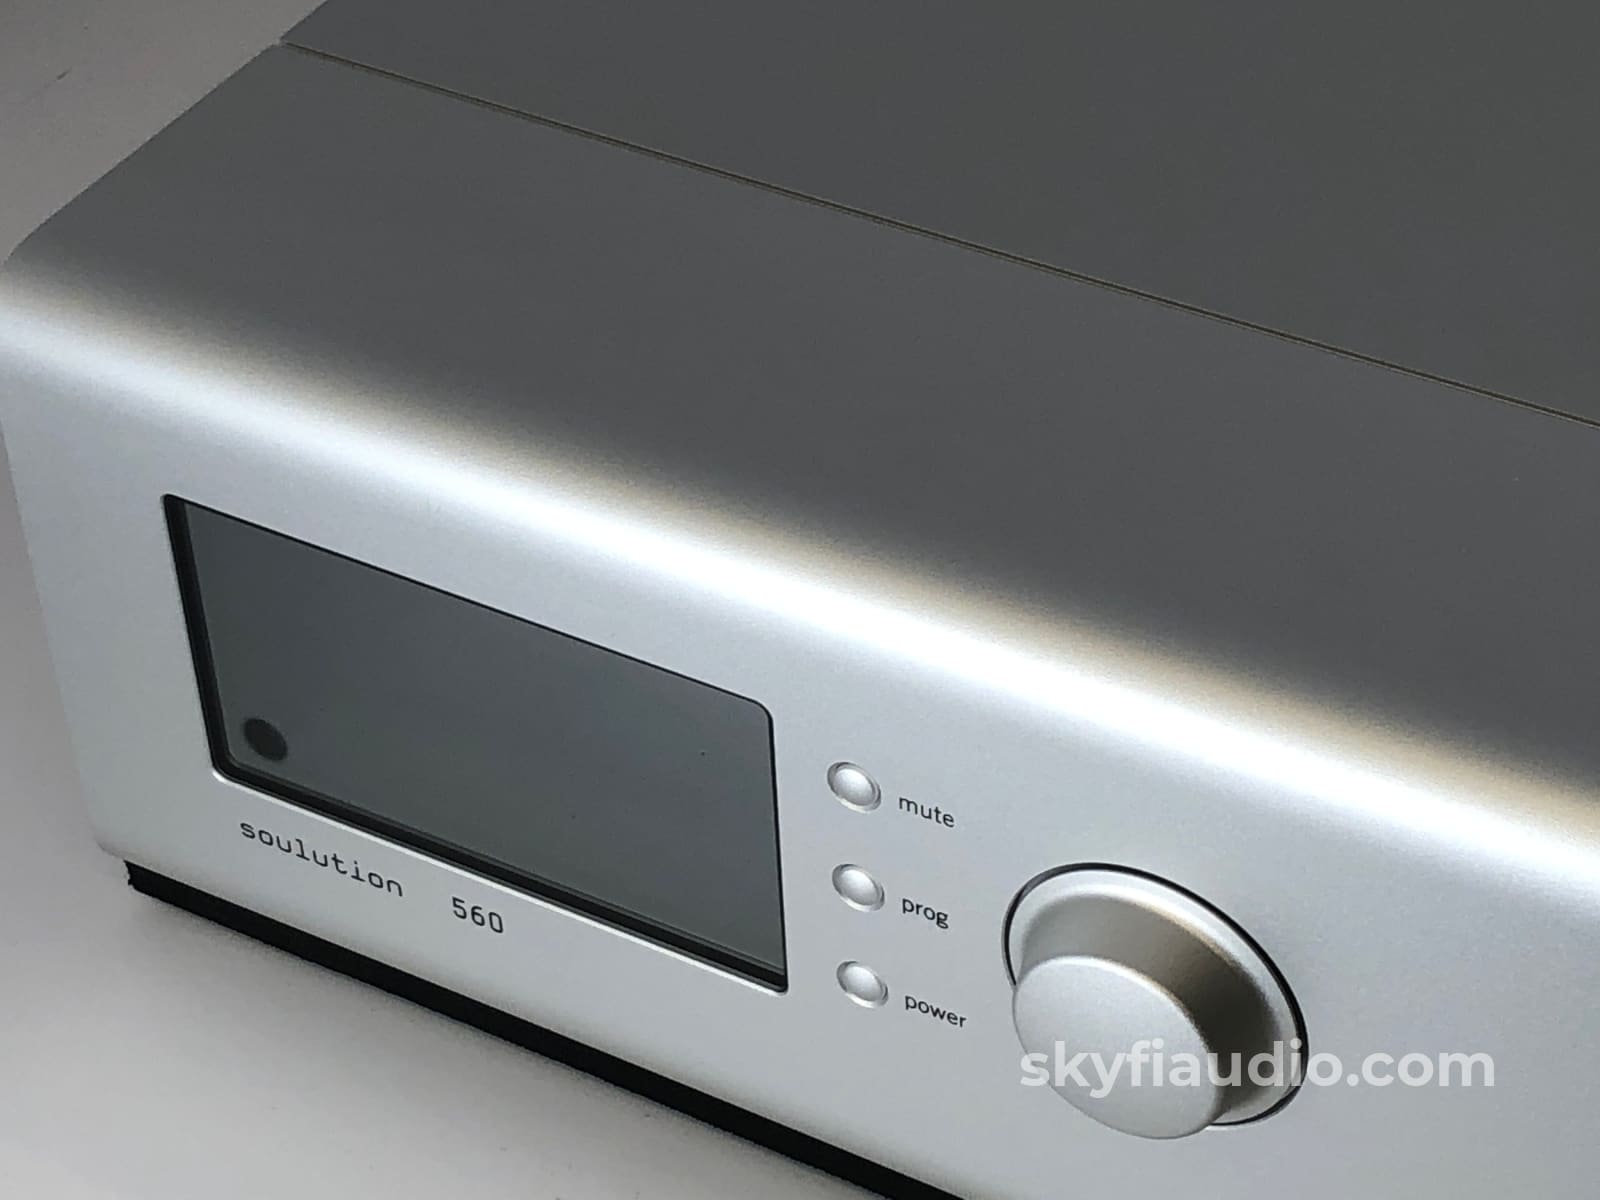 Soulution Audio 560 D/A Converter - Dsd Capable Very Advanced And Great Reviews $35K Msrp Cd +